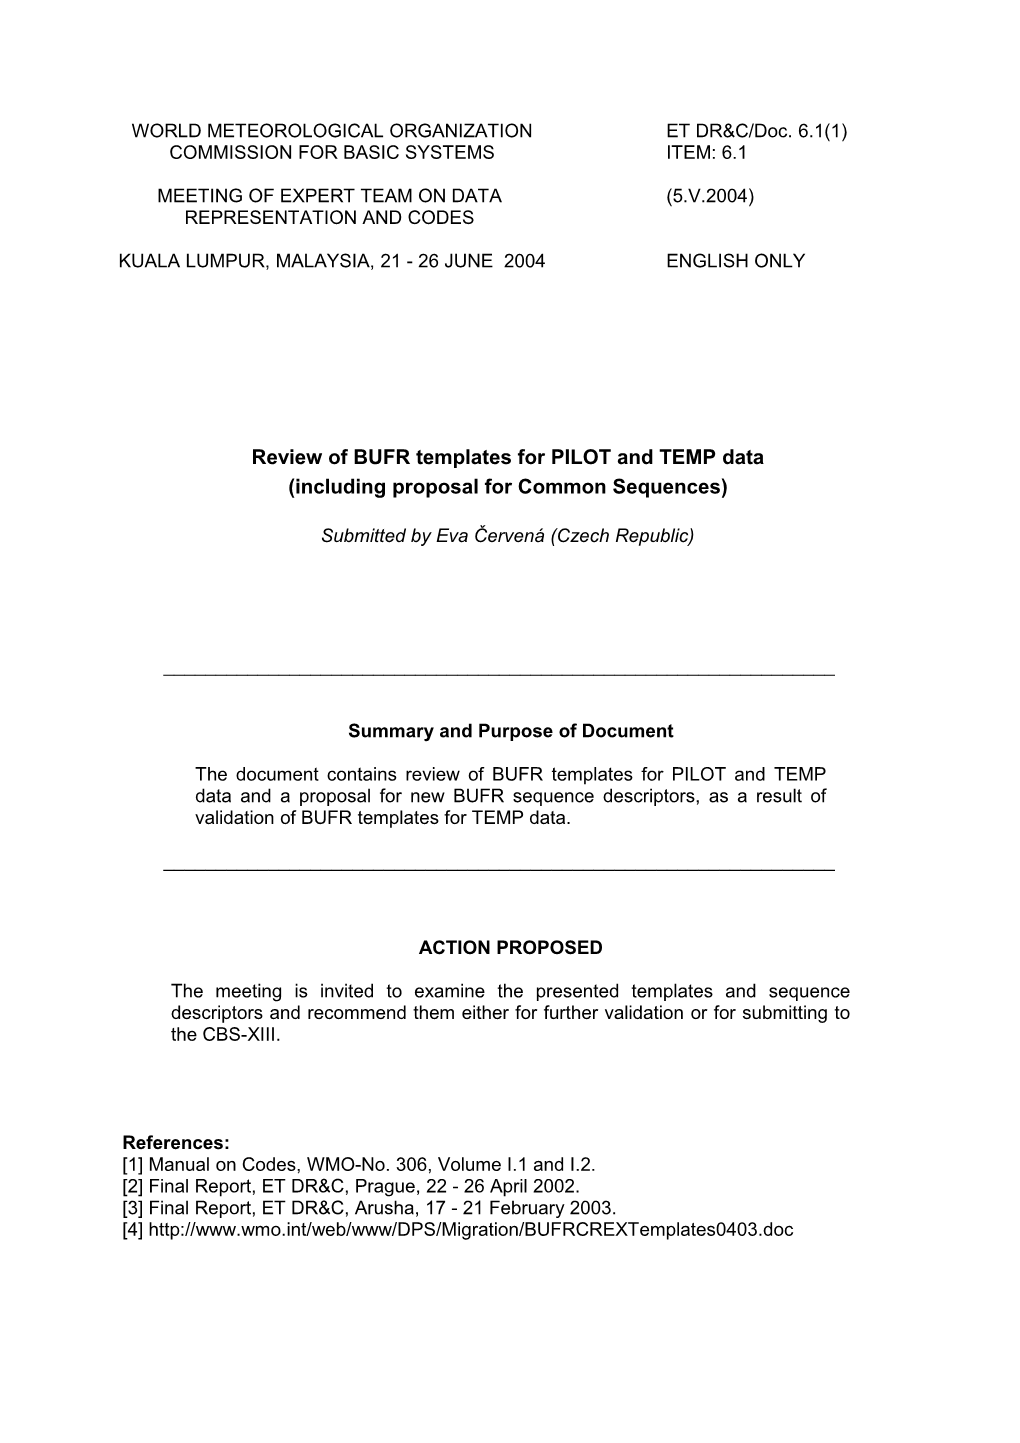 Review of BUFR Templates for PILOT and TEMP Data